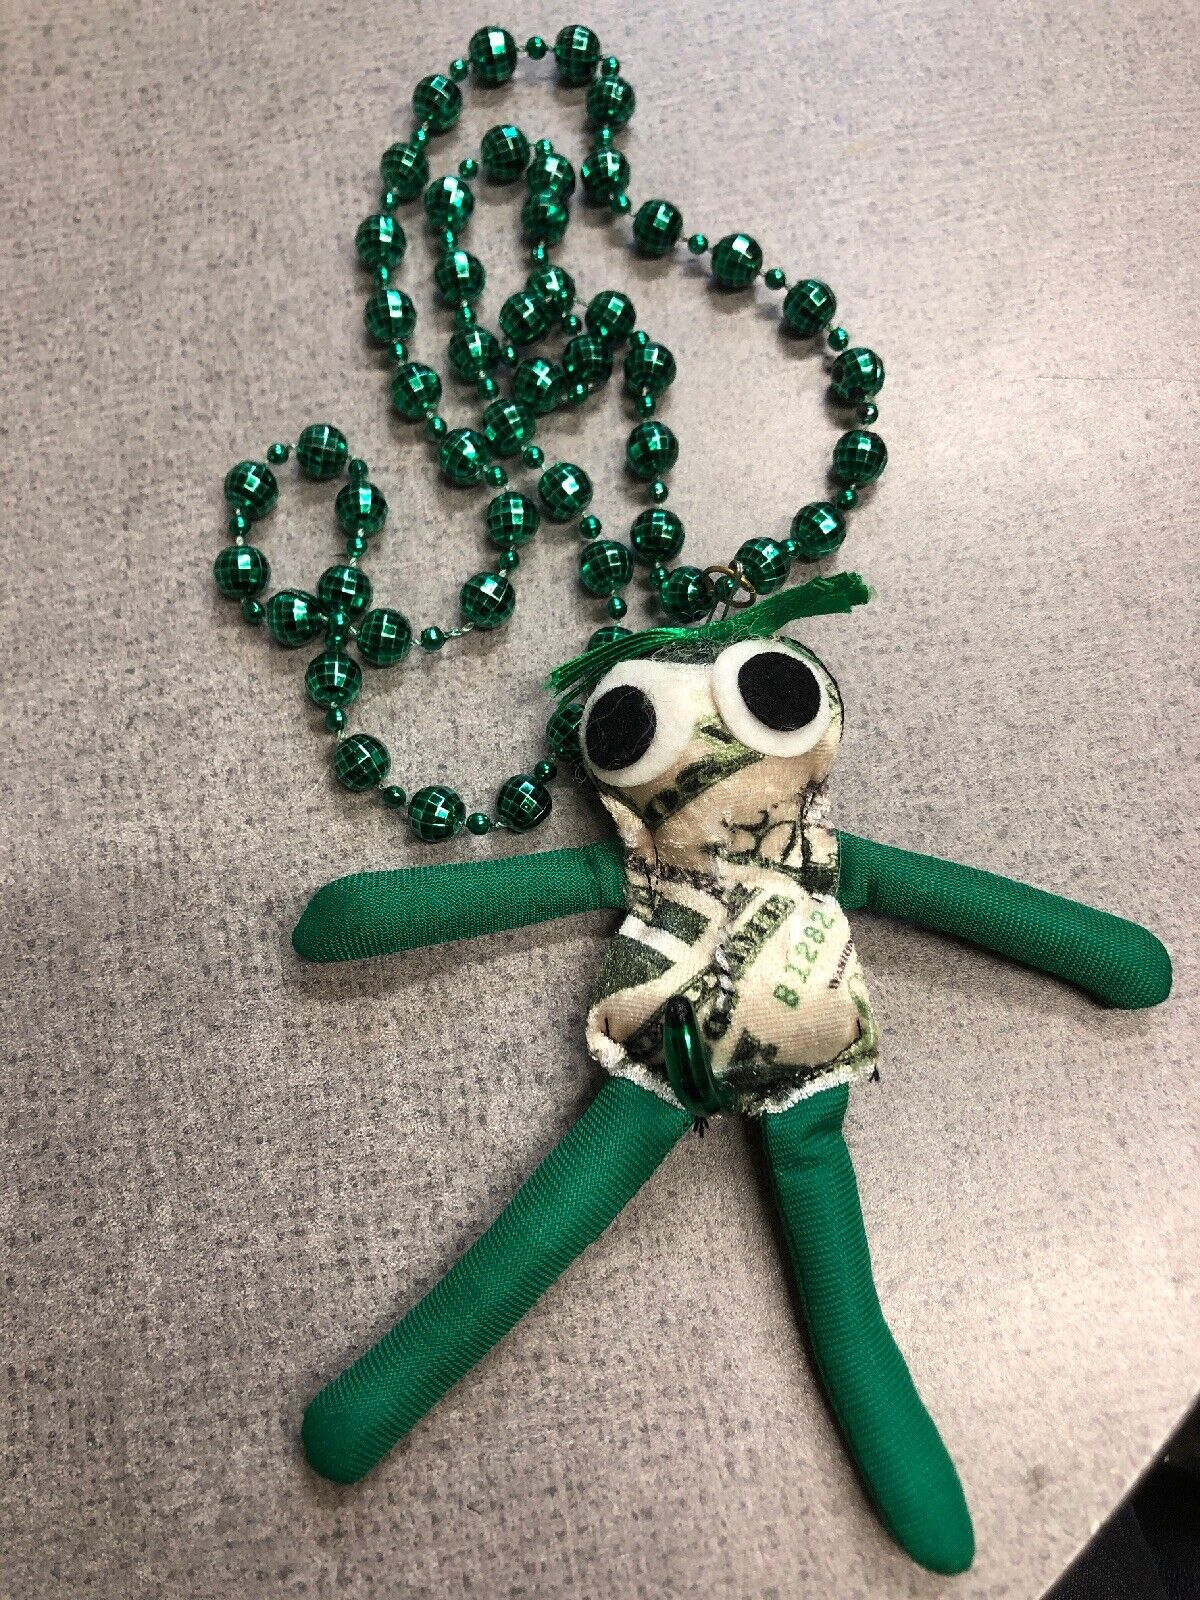 New Orleans Handmade Voodoo Doll Mardi Gras Necklace Money New Authentic